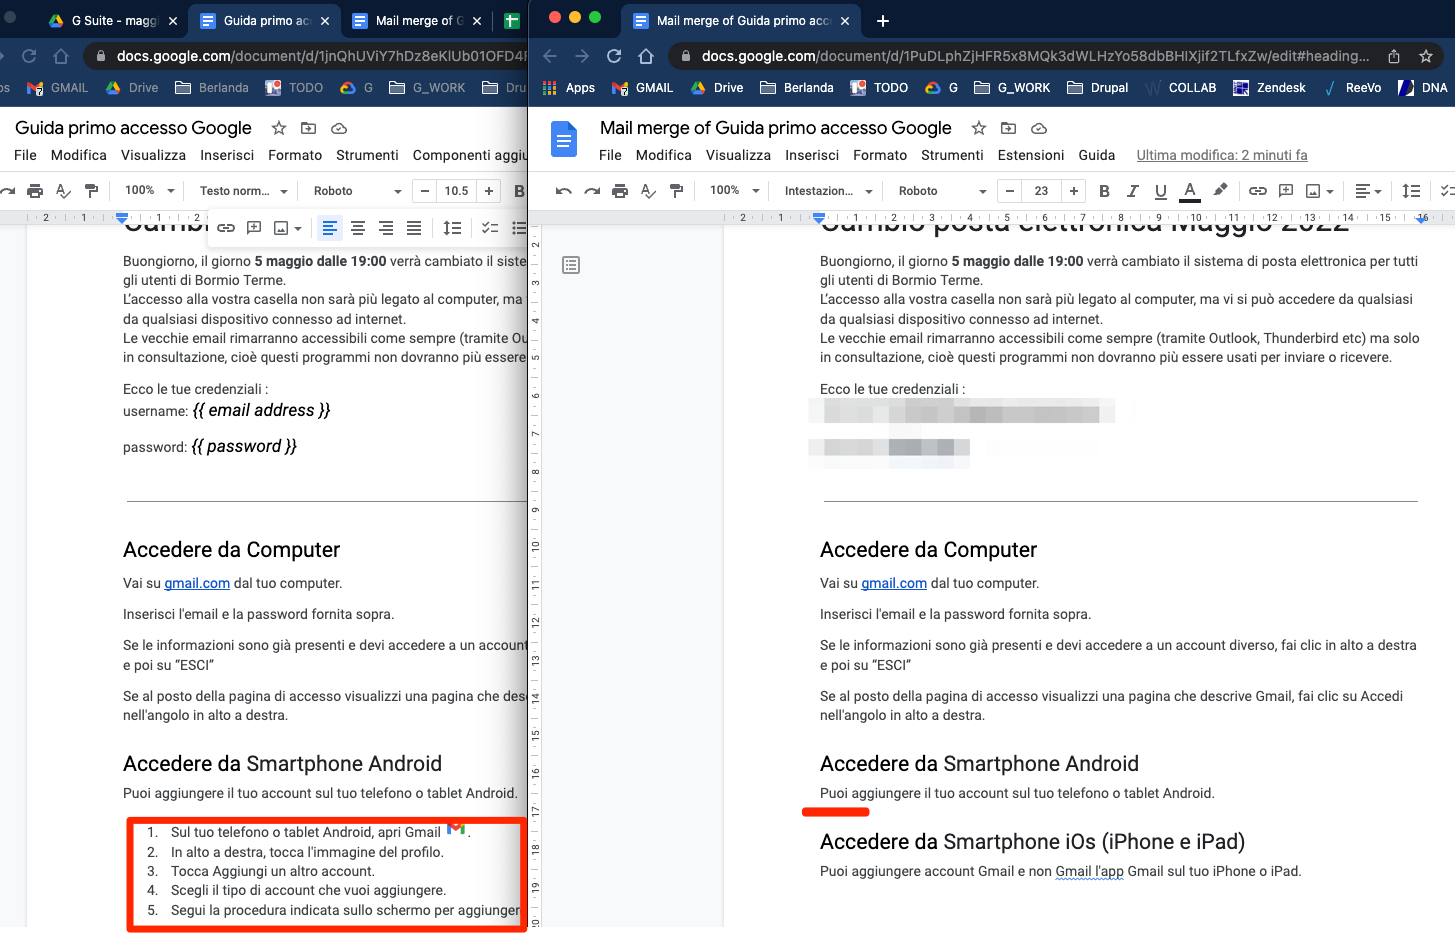 Mail_merge_of_Guida_primo_accesso_Google_-_Documenti_Google_and_Guida_primo_accesso_Google_-_Documenti_Google.png